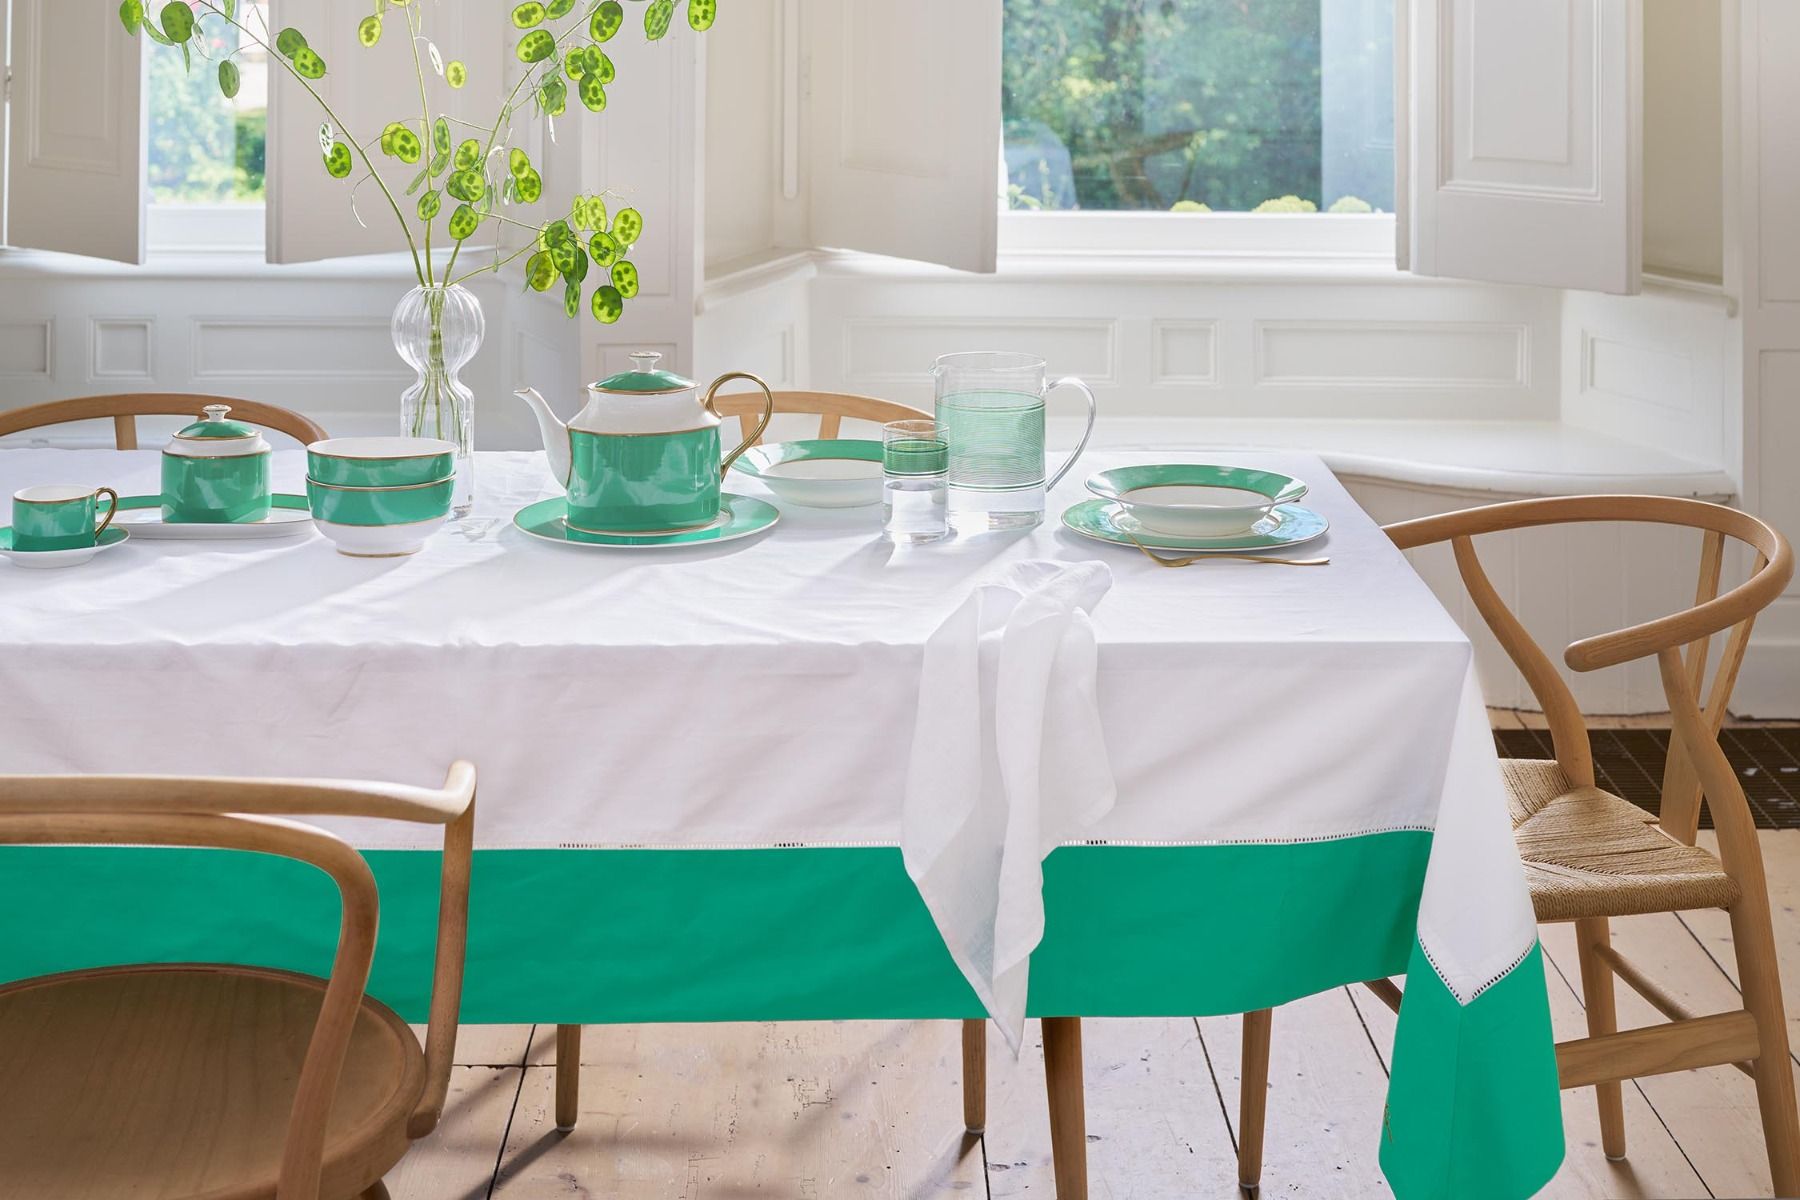 Pip Chique Tablecloth Green